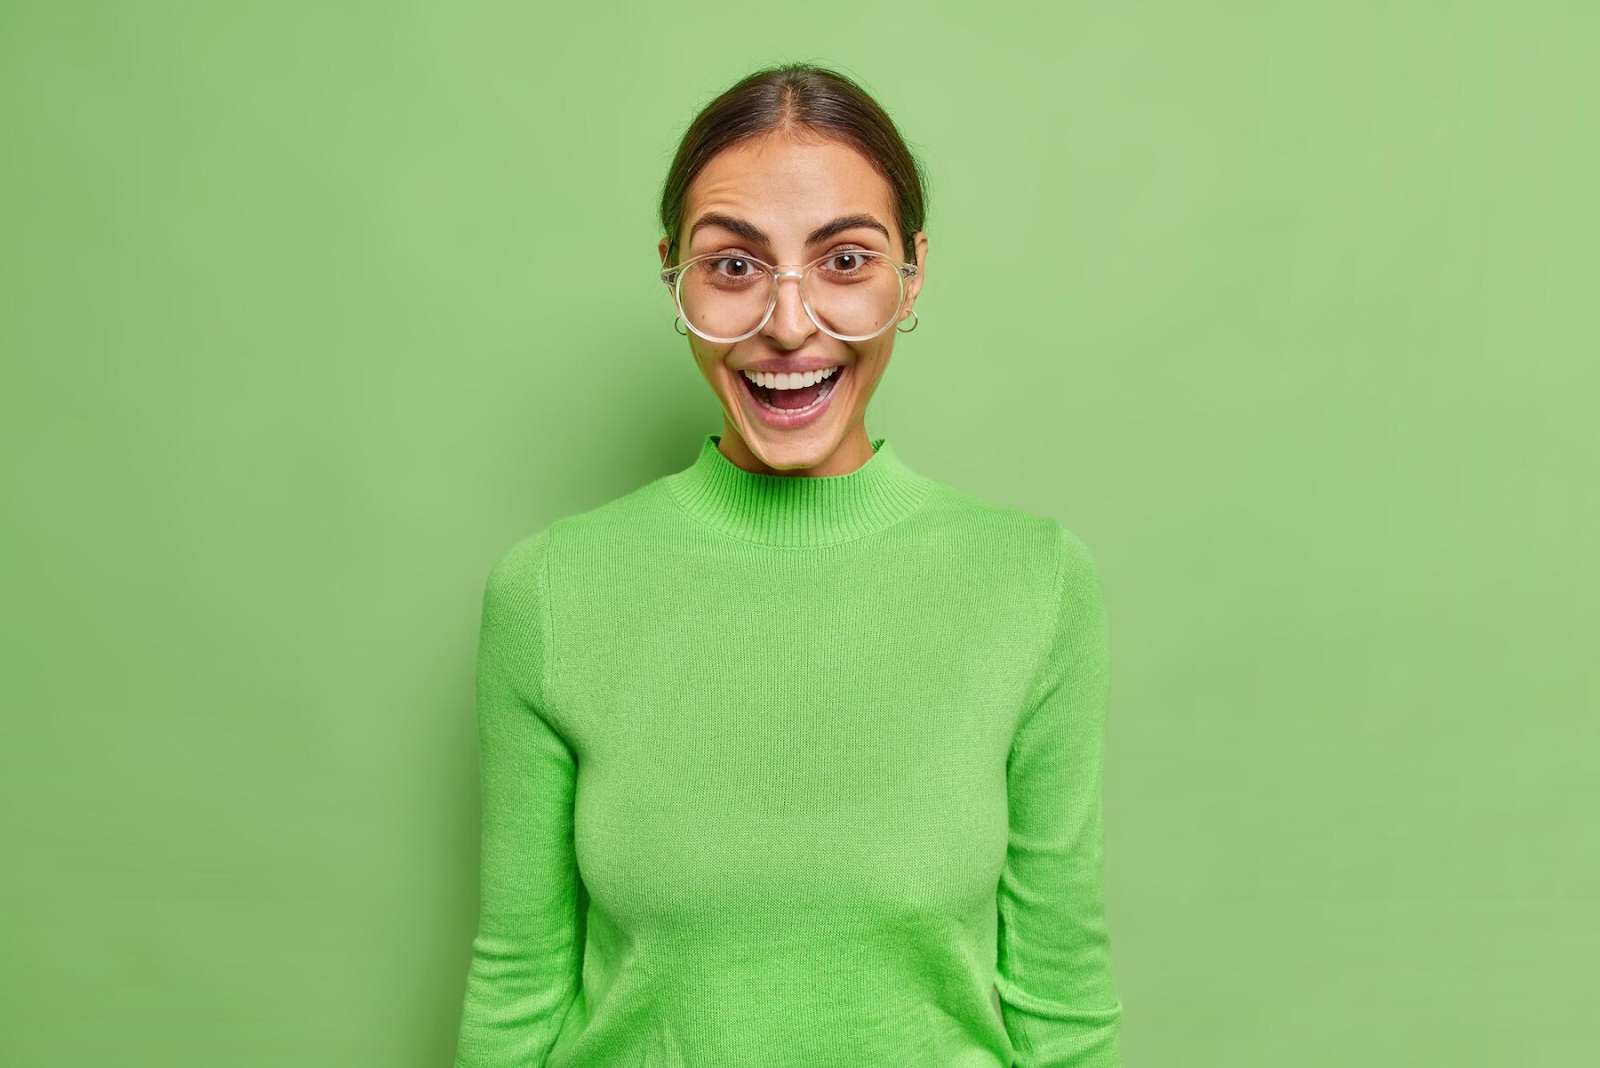 A woman in green shirt laughing.